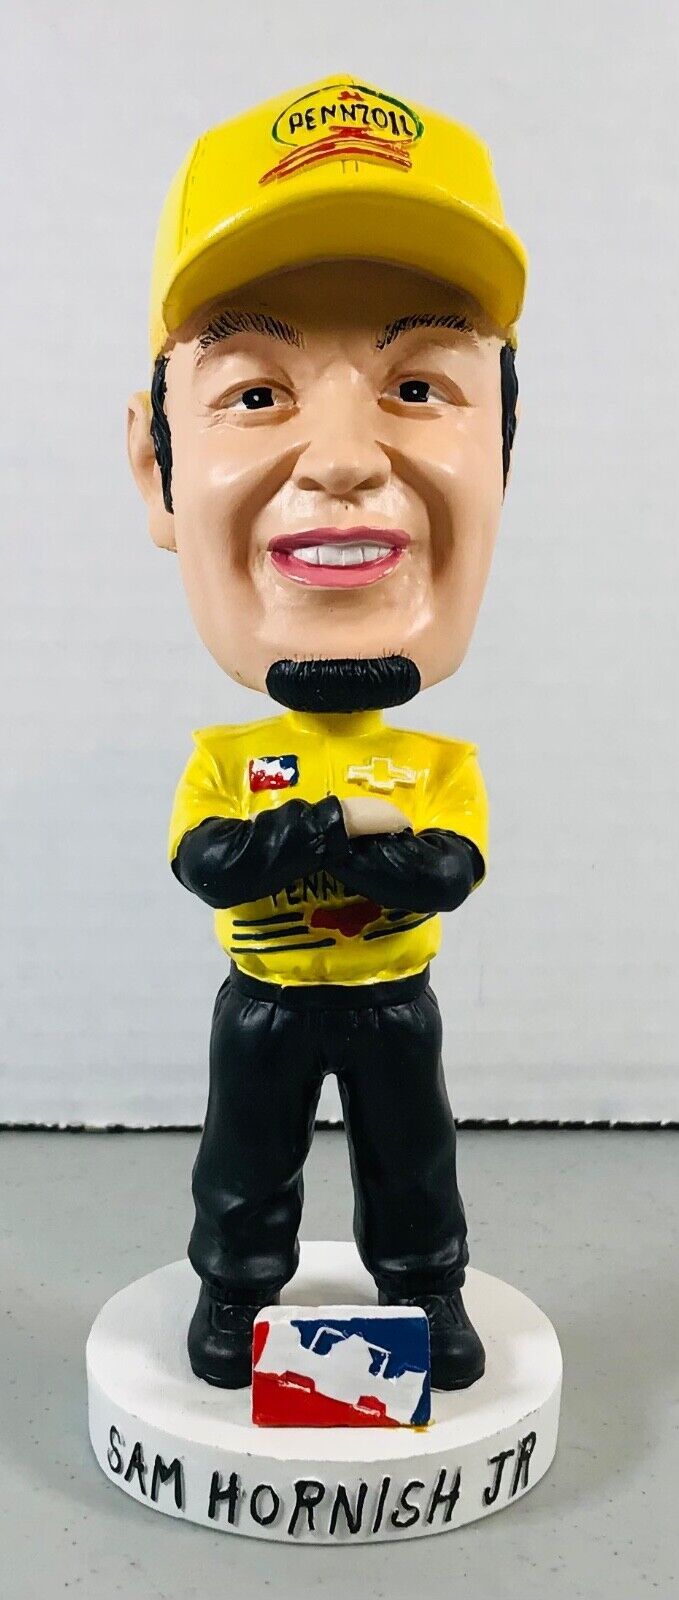 Primary image for Sam Hornish Jr Bobblehead - IndyCar - IRL - 2002 Kentucky Speedway Indy 300 New